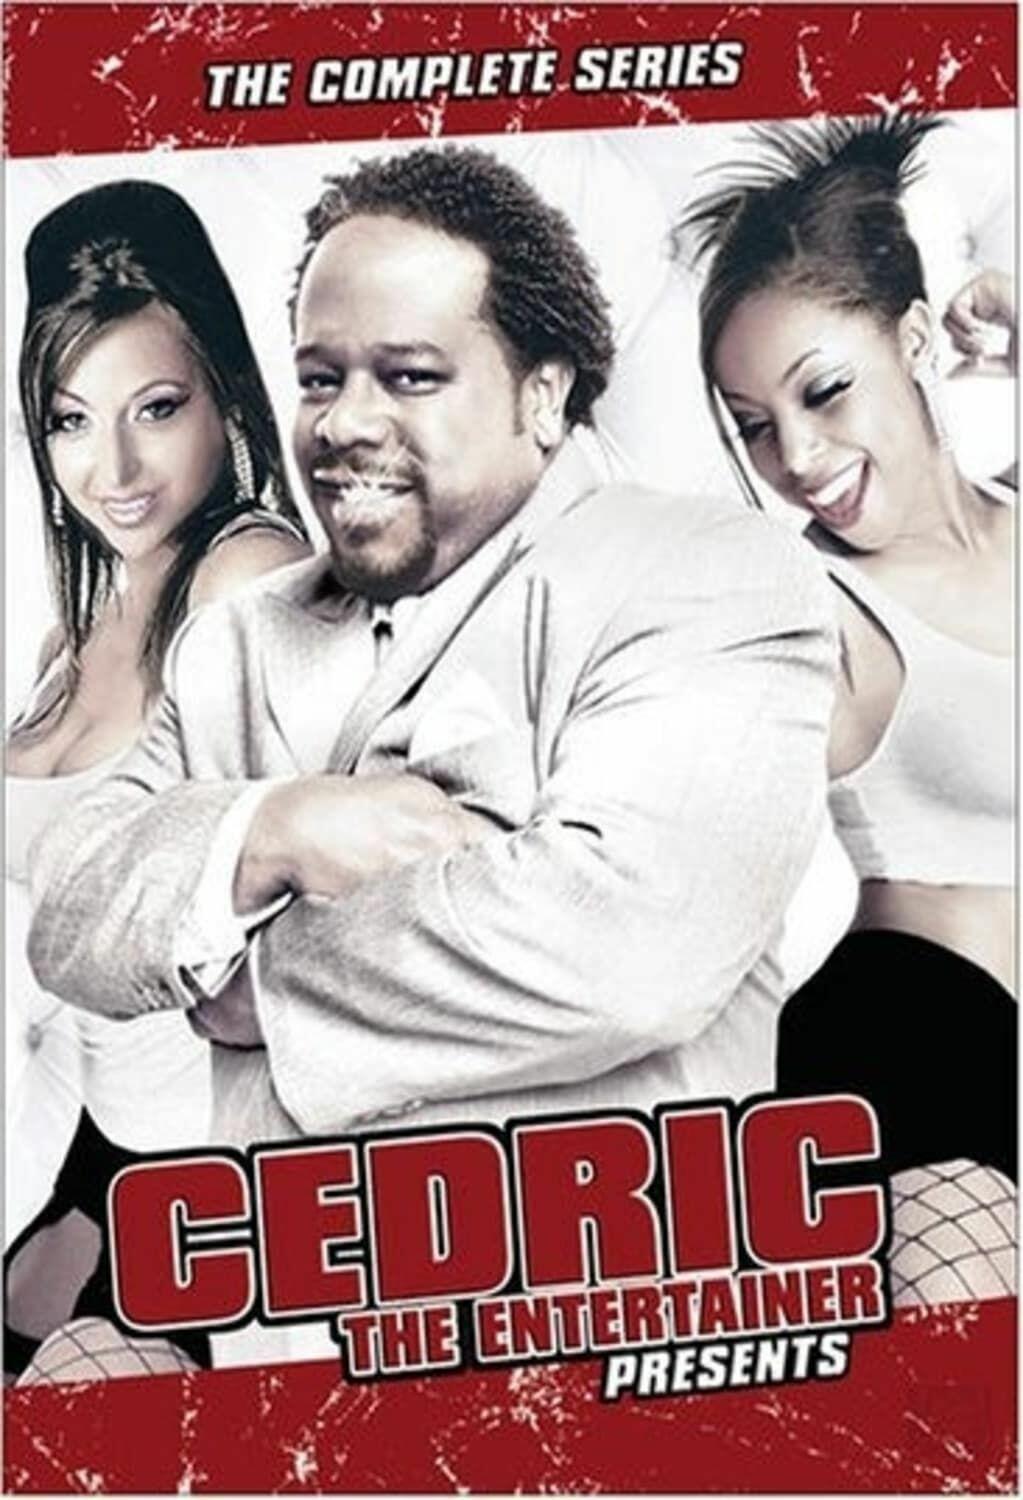 Cedric the Entertainer Presents – The Complete Series (DVD) on MovieShack